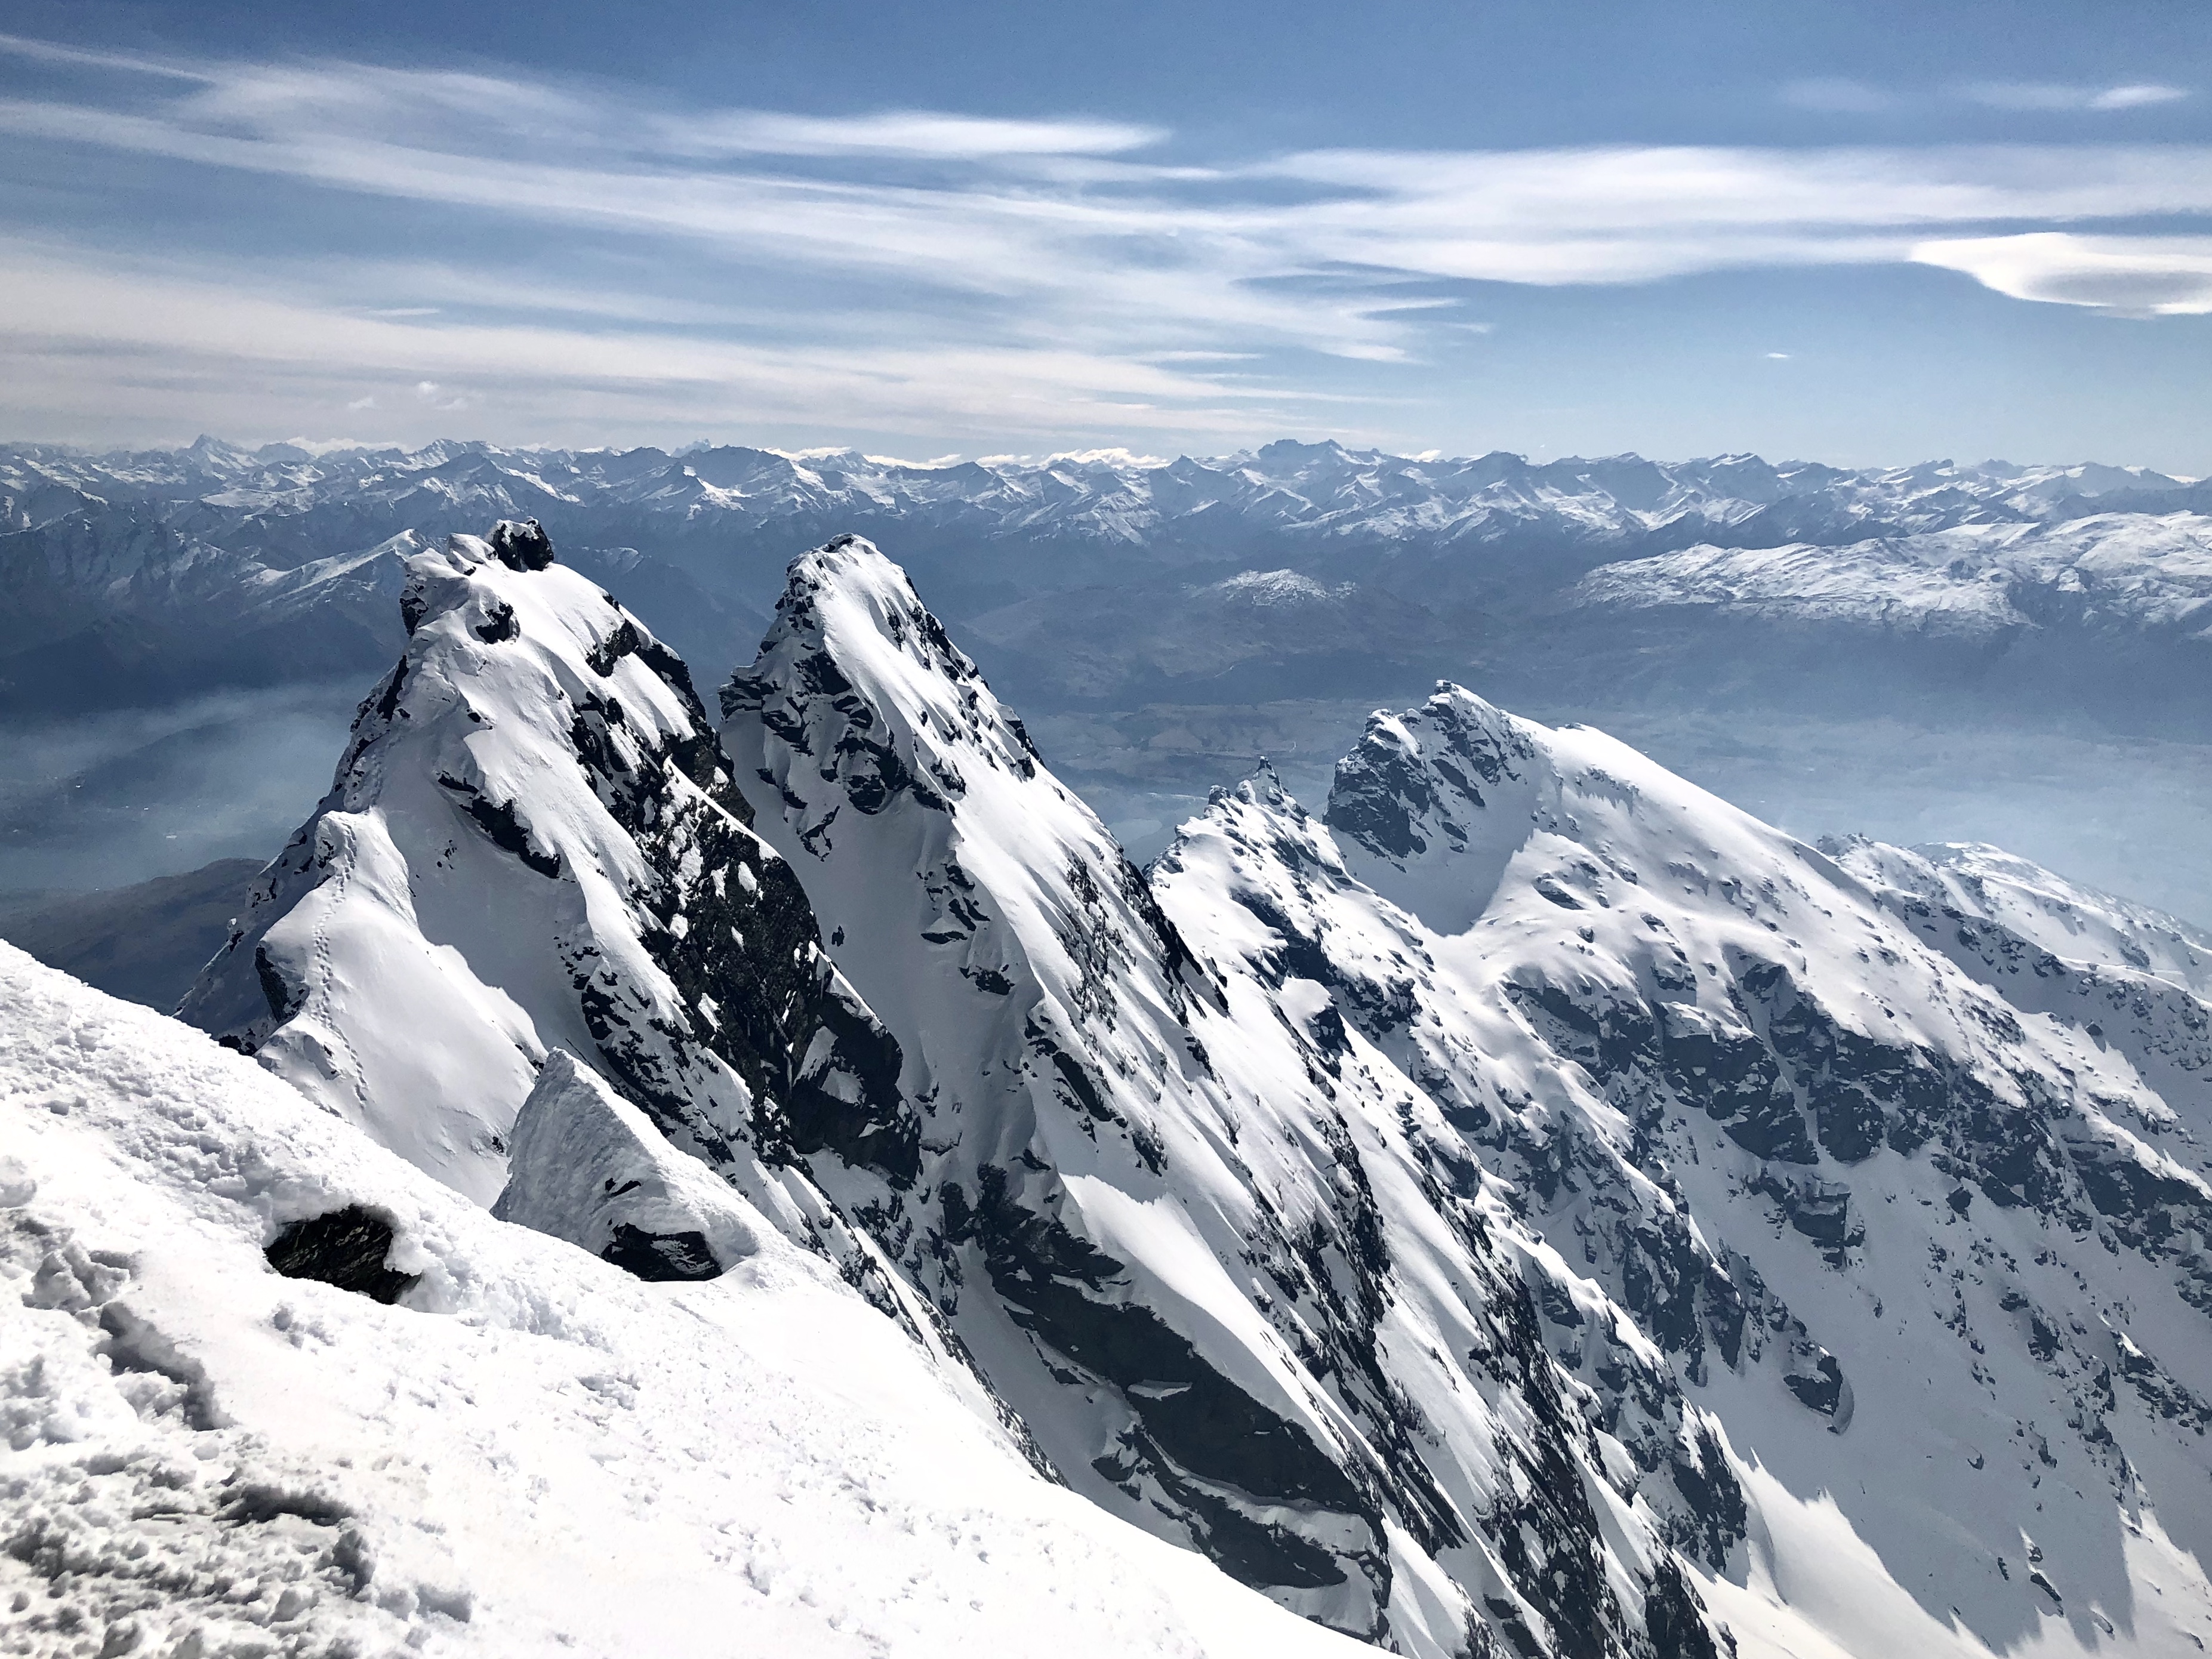 Single Cone Day Trip: climbing and skiing the highest peak in The Remarkables range